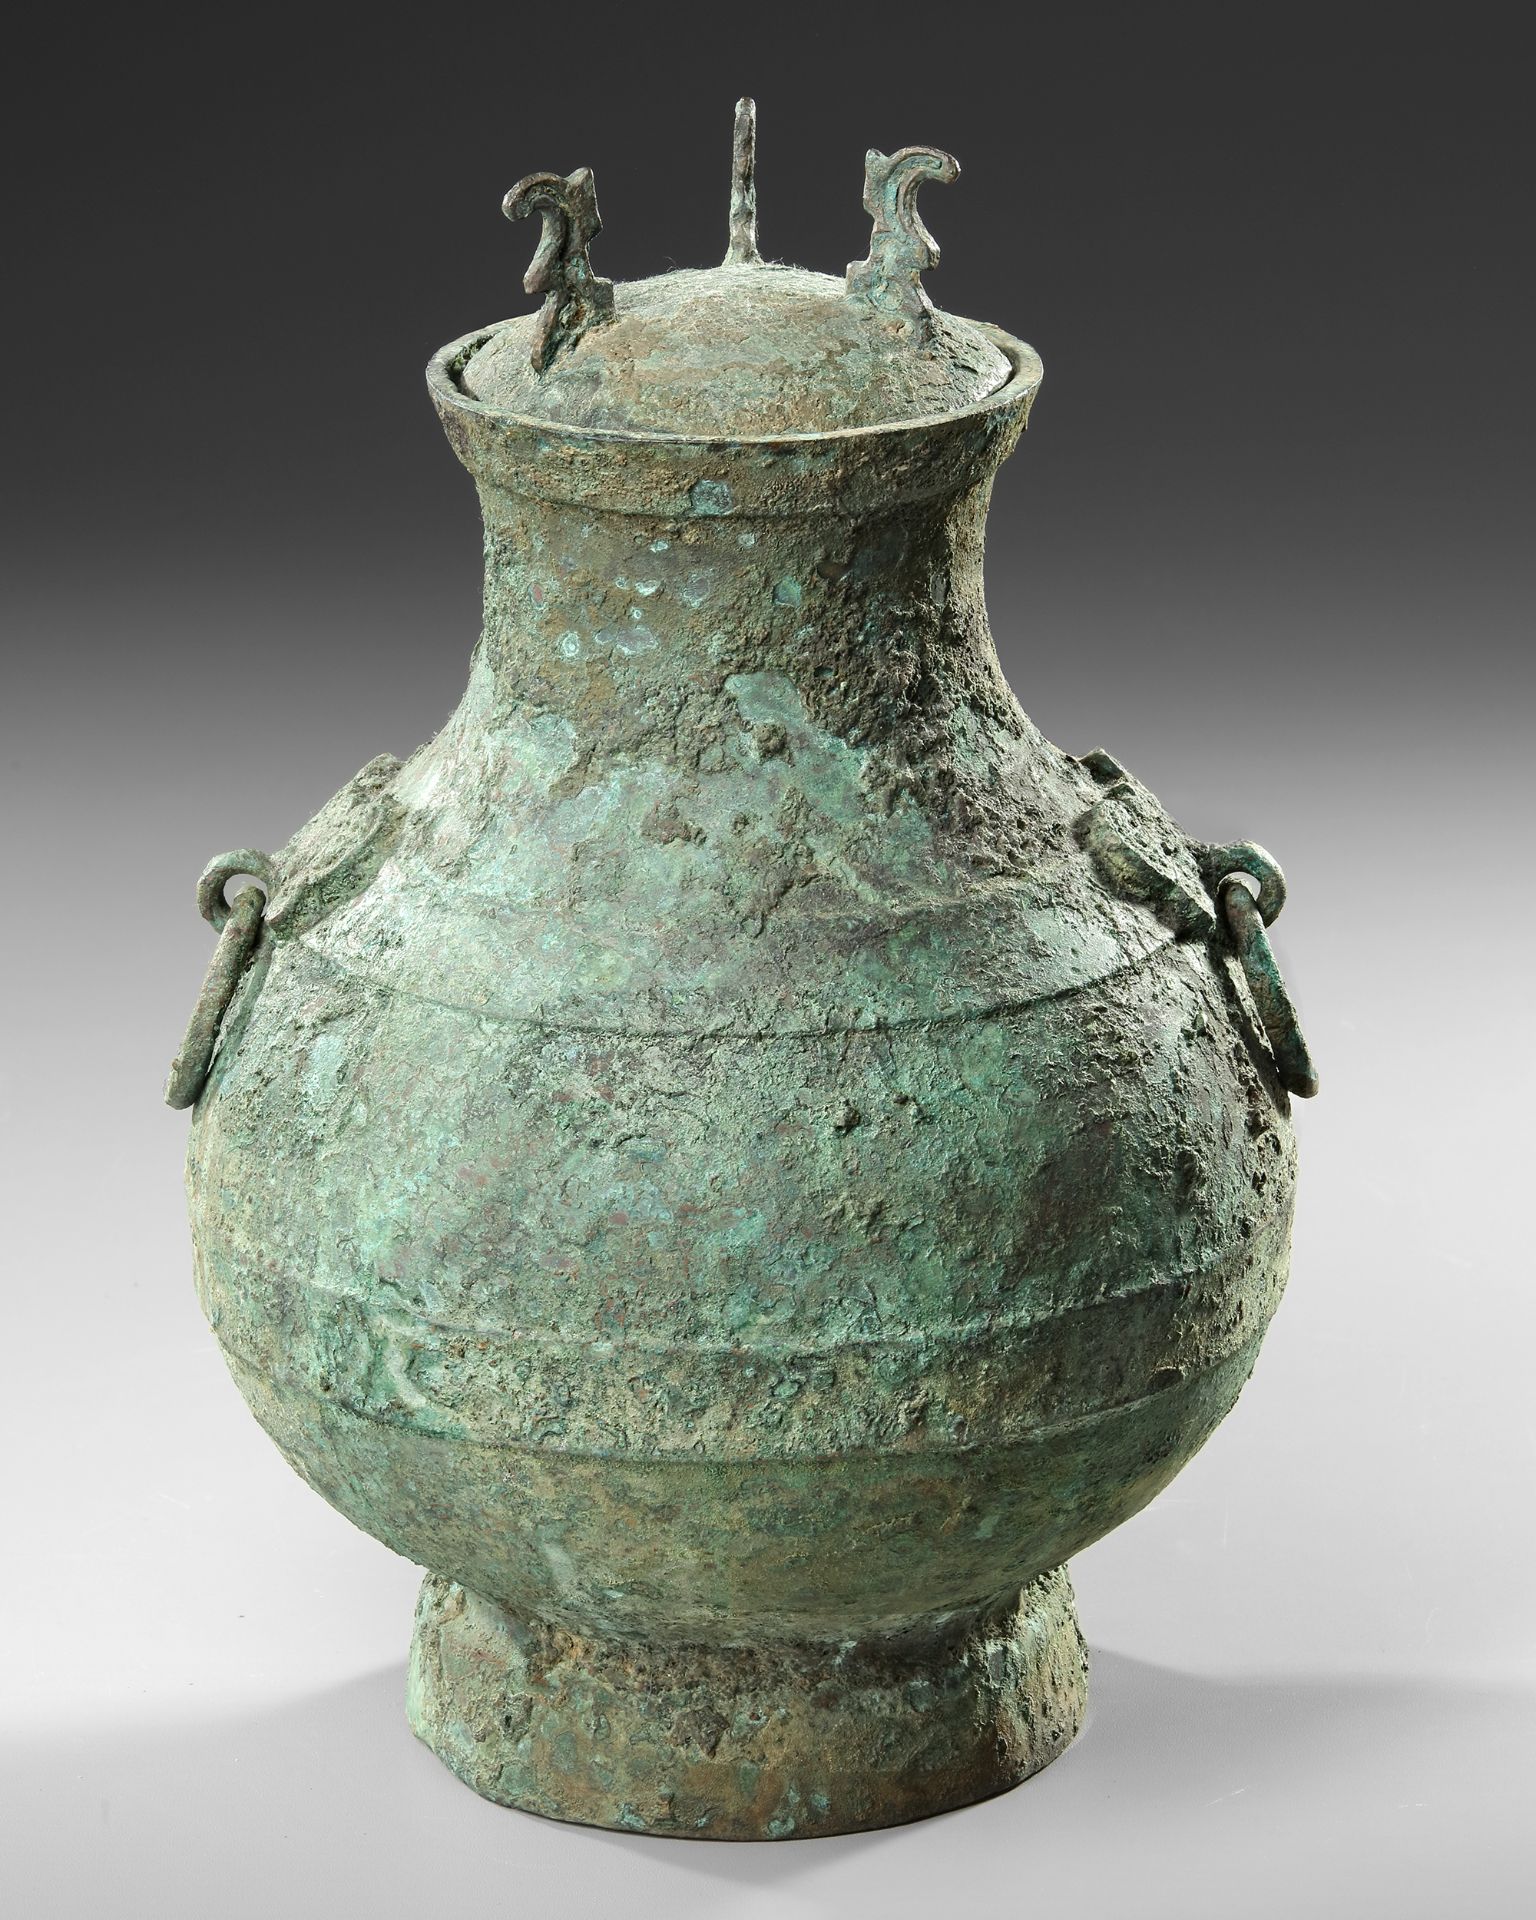 A CHINESE BRONZE RITUAL HU VASE, HAN DYNASTY (206 BC-220 AD) OR LATER - Image 3 of 5